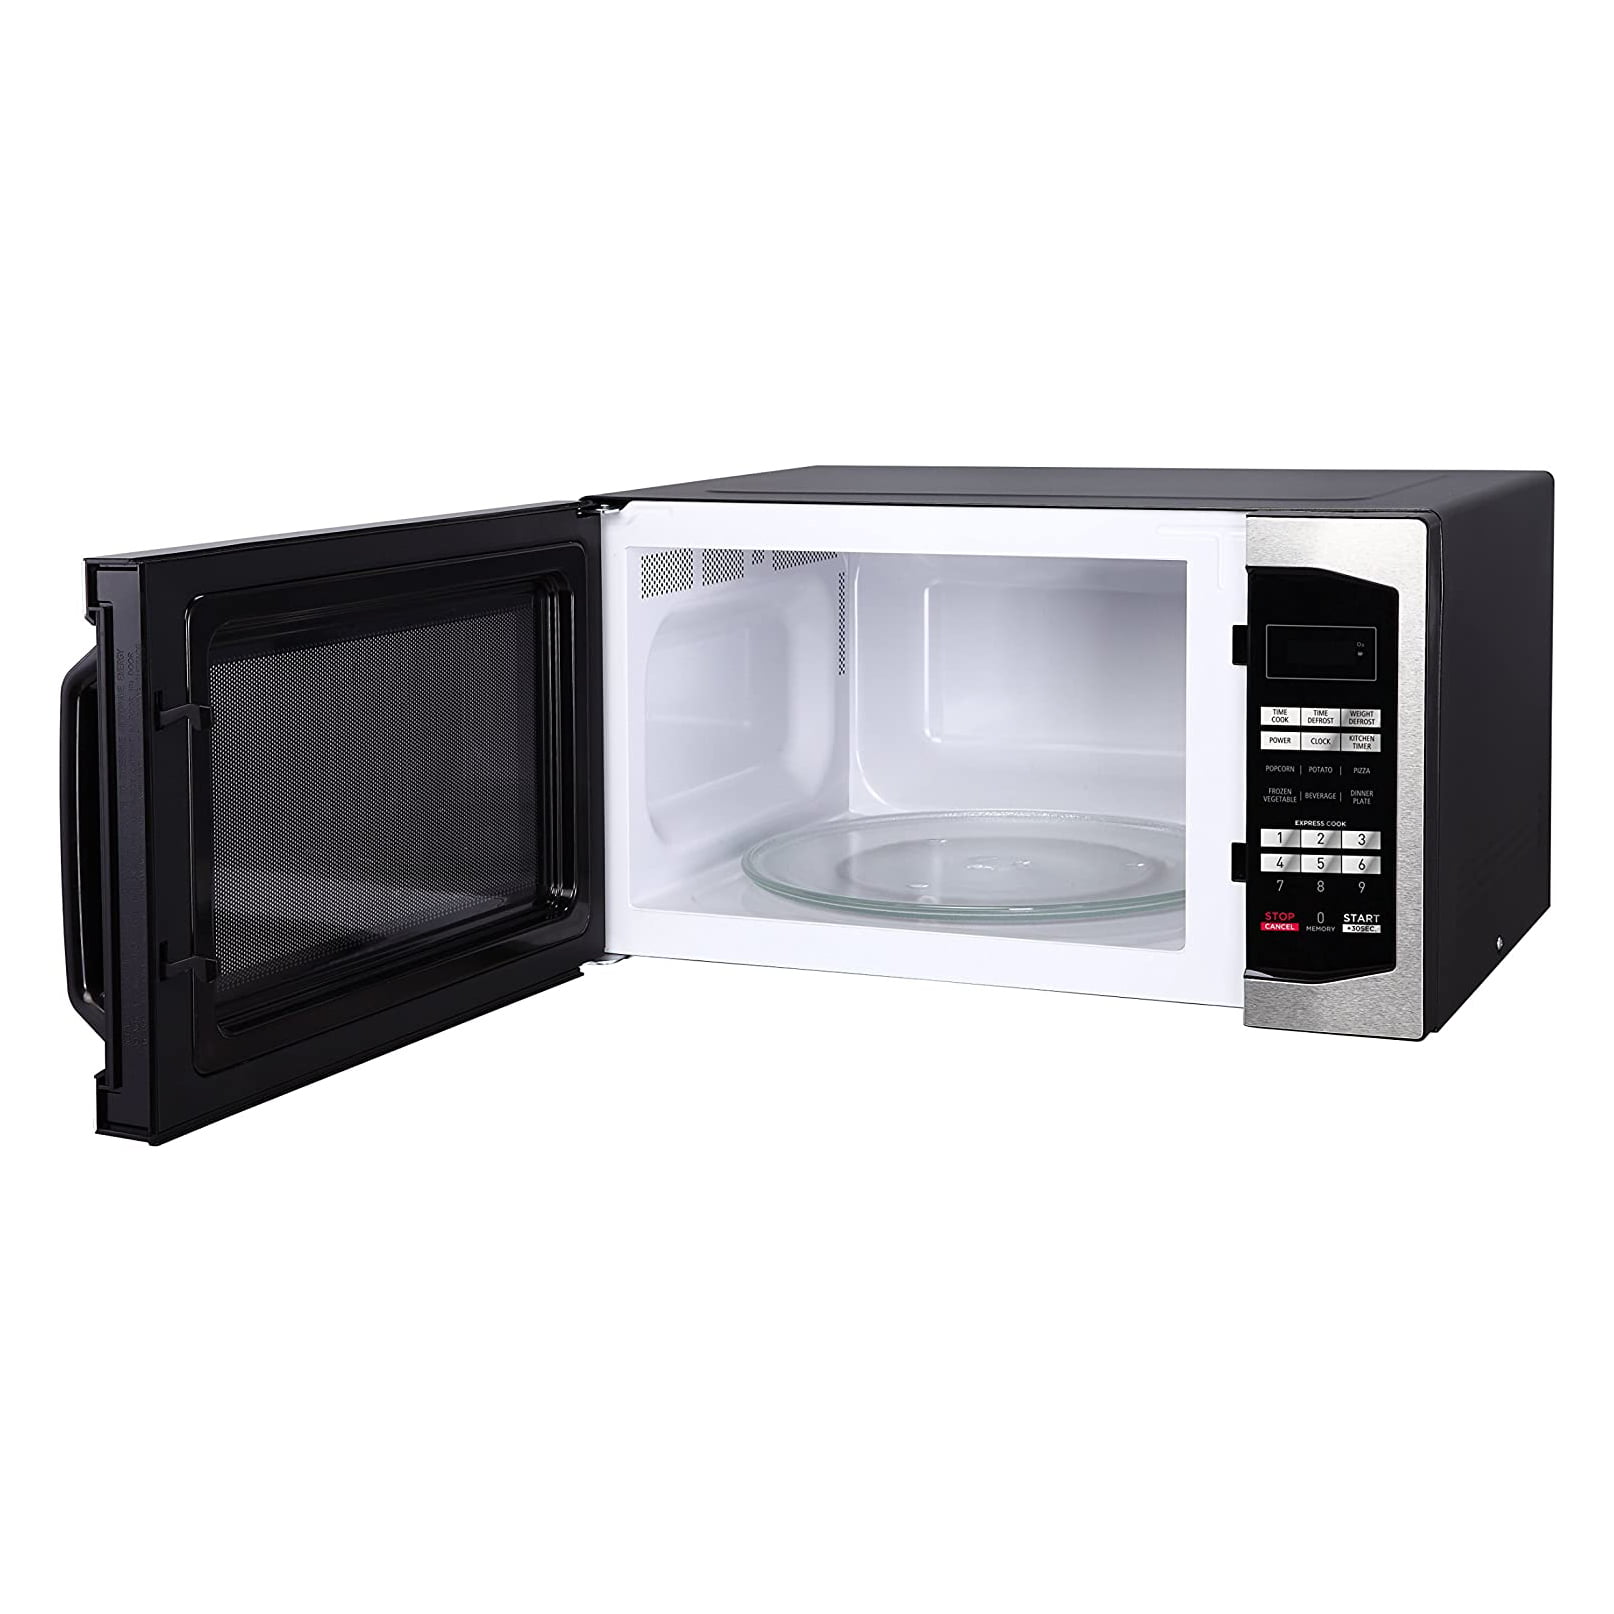 1.6 cu Magic Chef MCM1611W 1100W Oven ft White Microwave 